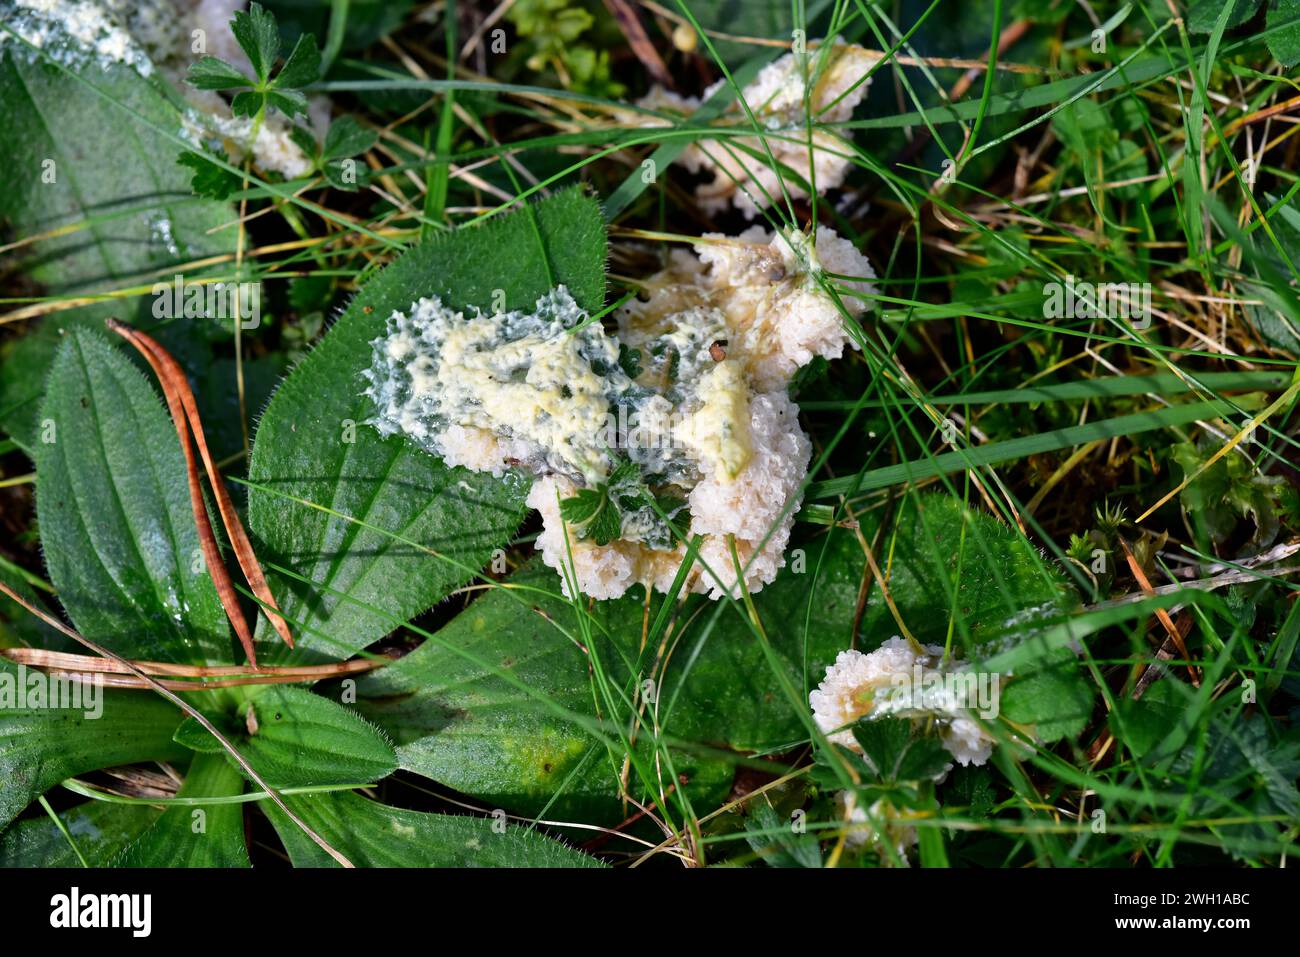 Dog sick fungus (Mucilago crustacea) is a slime mould. This photo was taken in Serra de Busa, Lleida province, Catalonia, Spain. Stock Photo